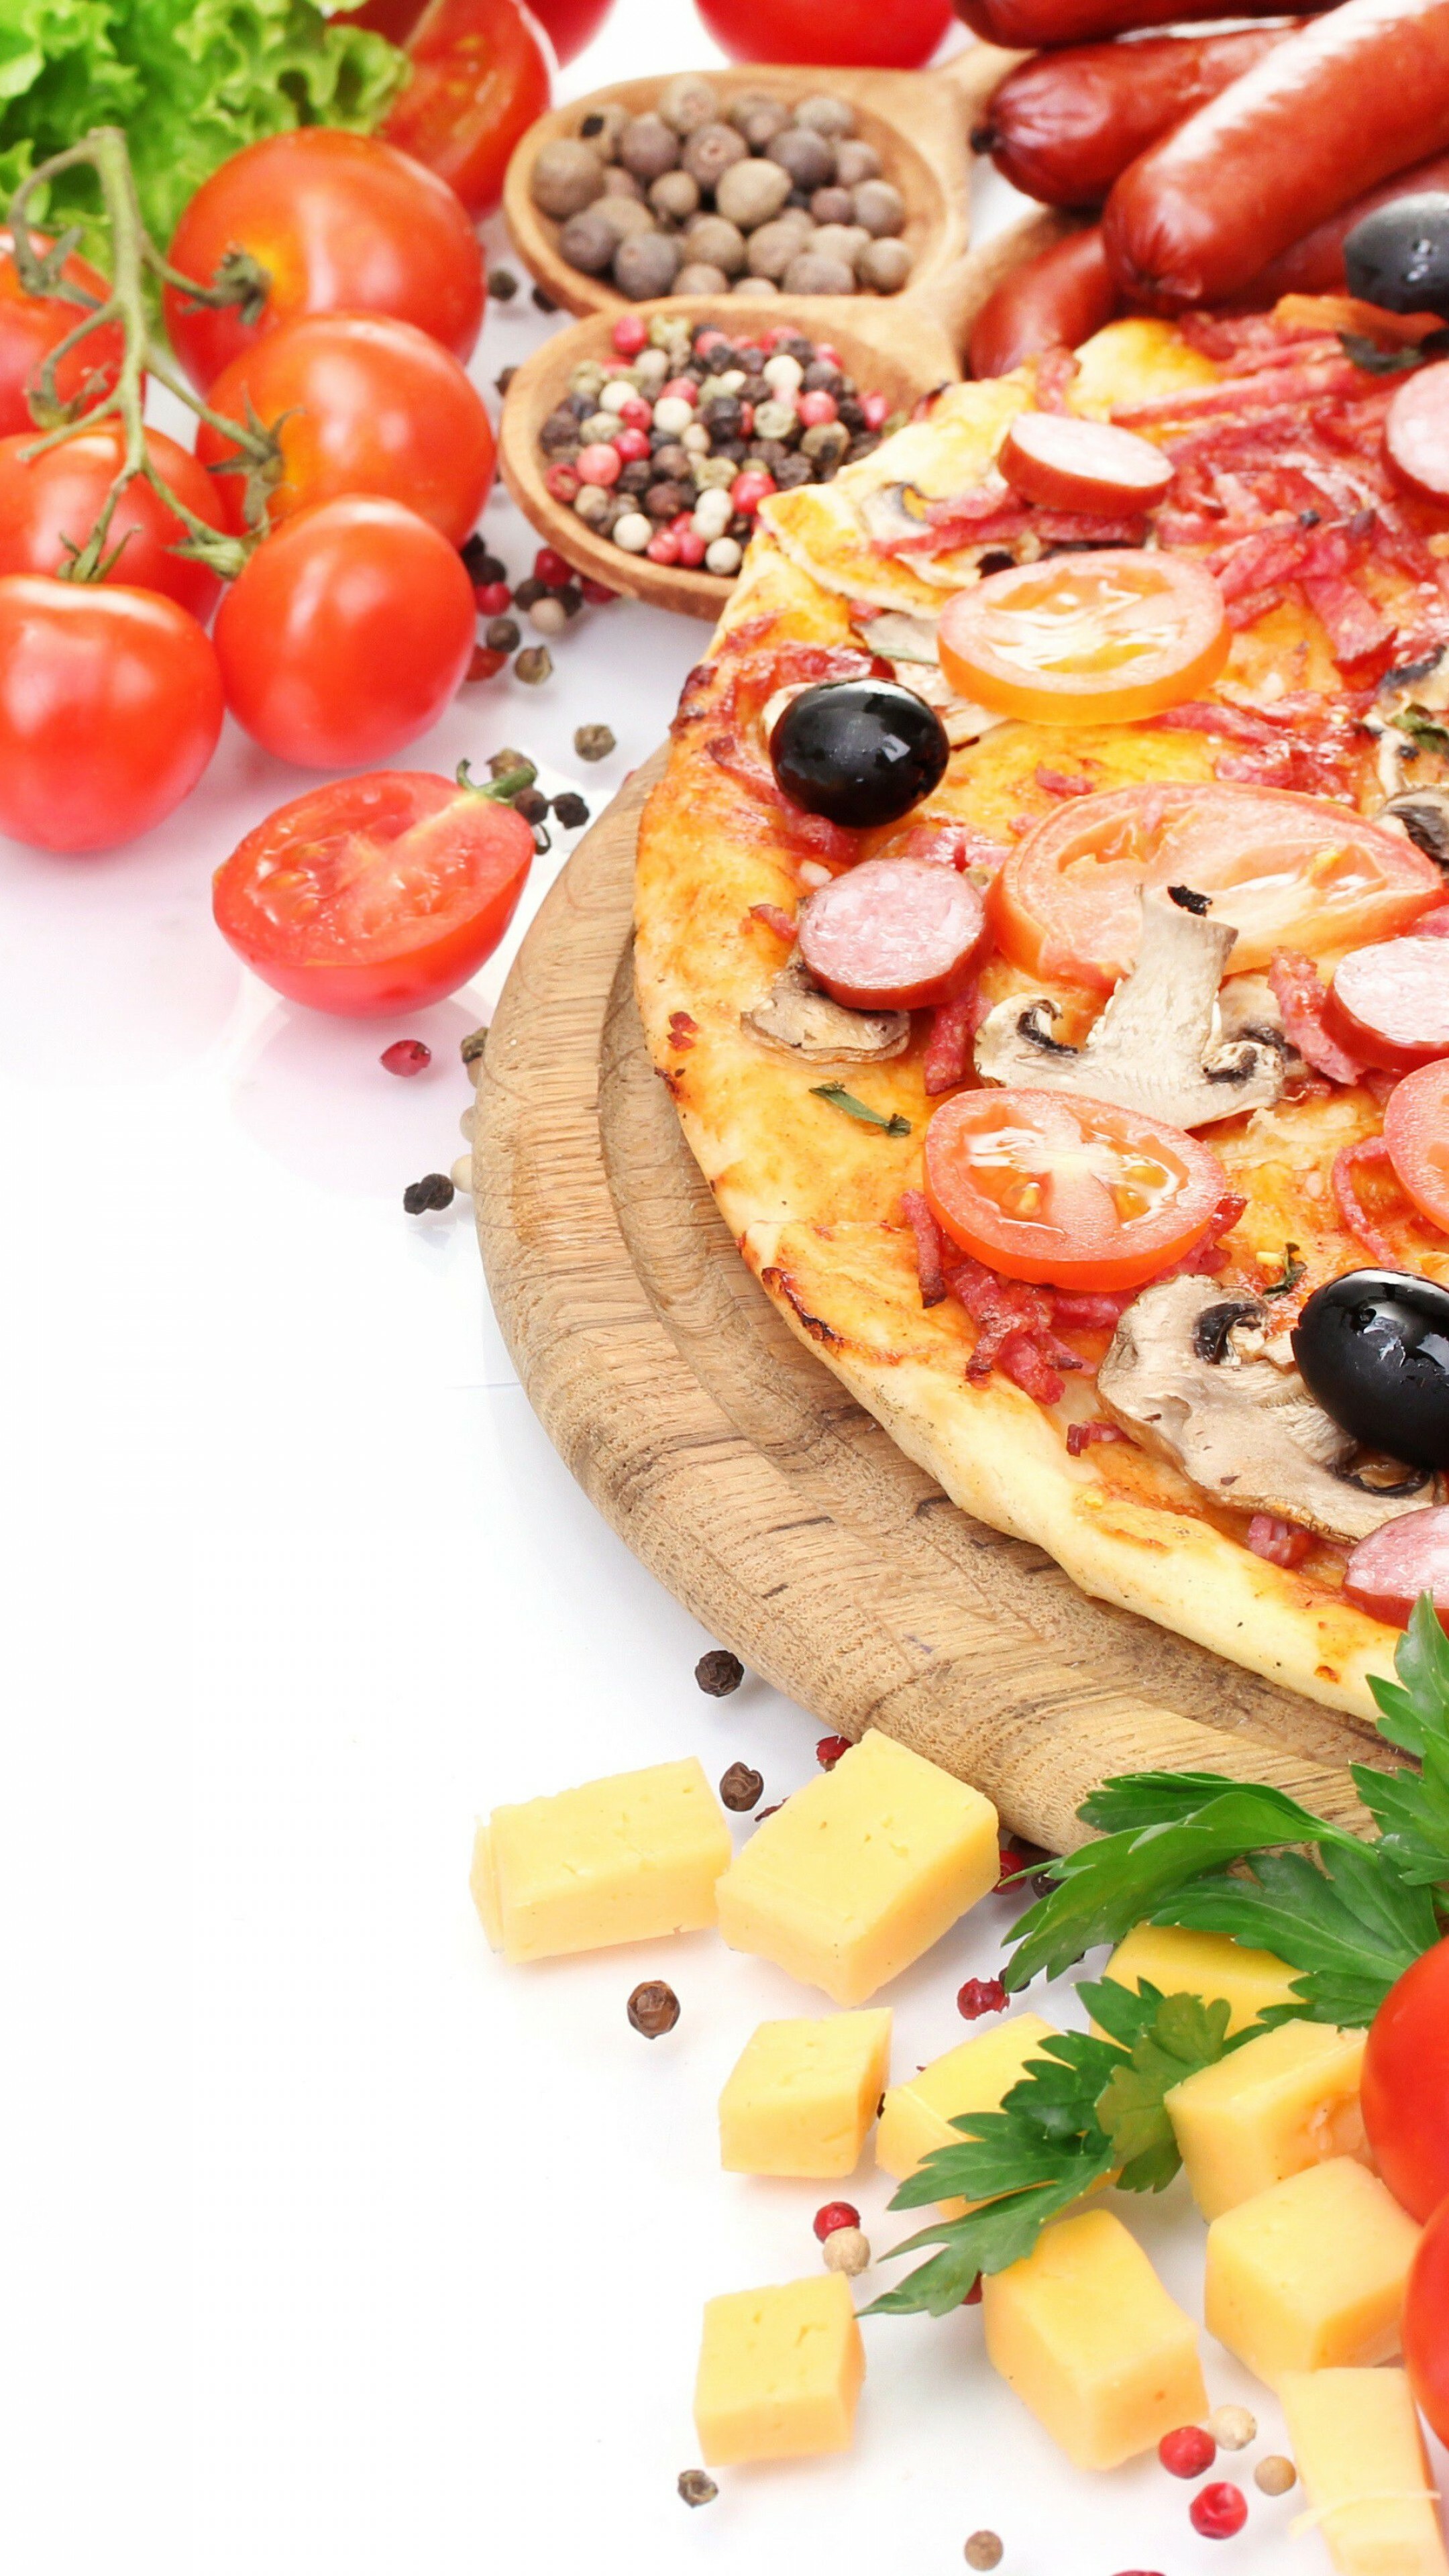 Pizza: Dish made typically of flattened bread dough, A savory mixture of tomatoes and cheese. 2160x3840 4K Wallpaper.